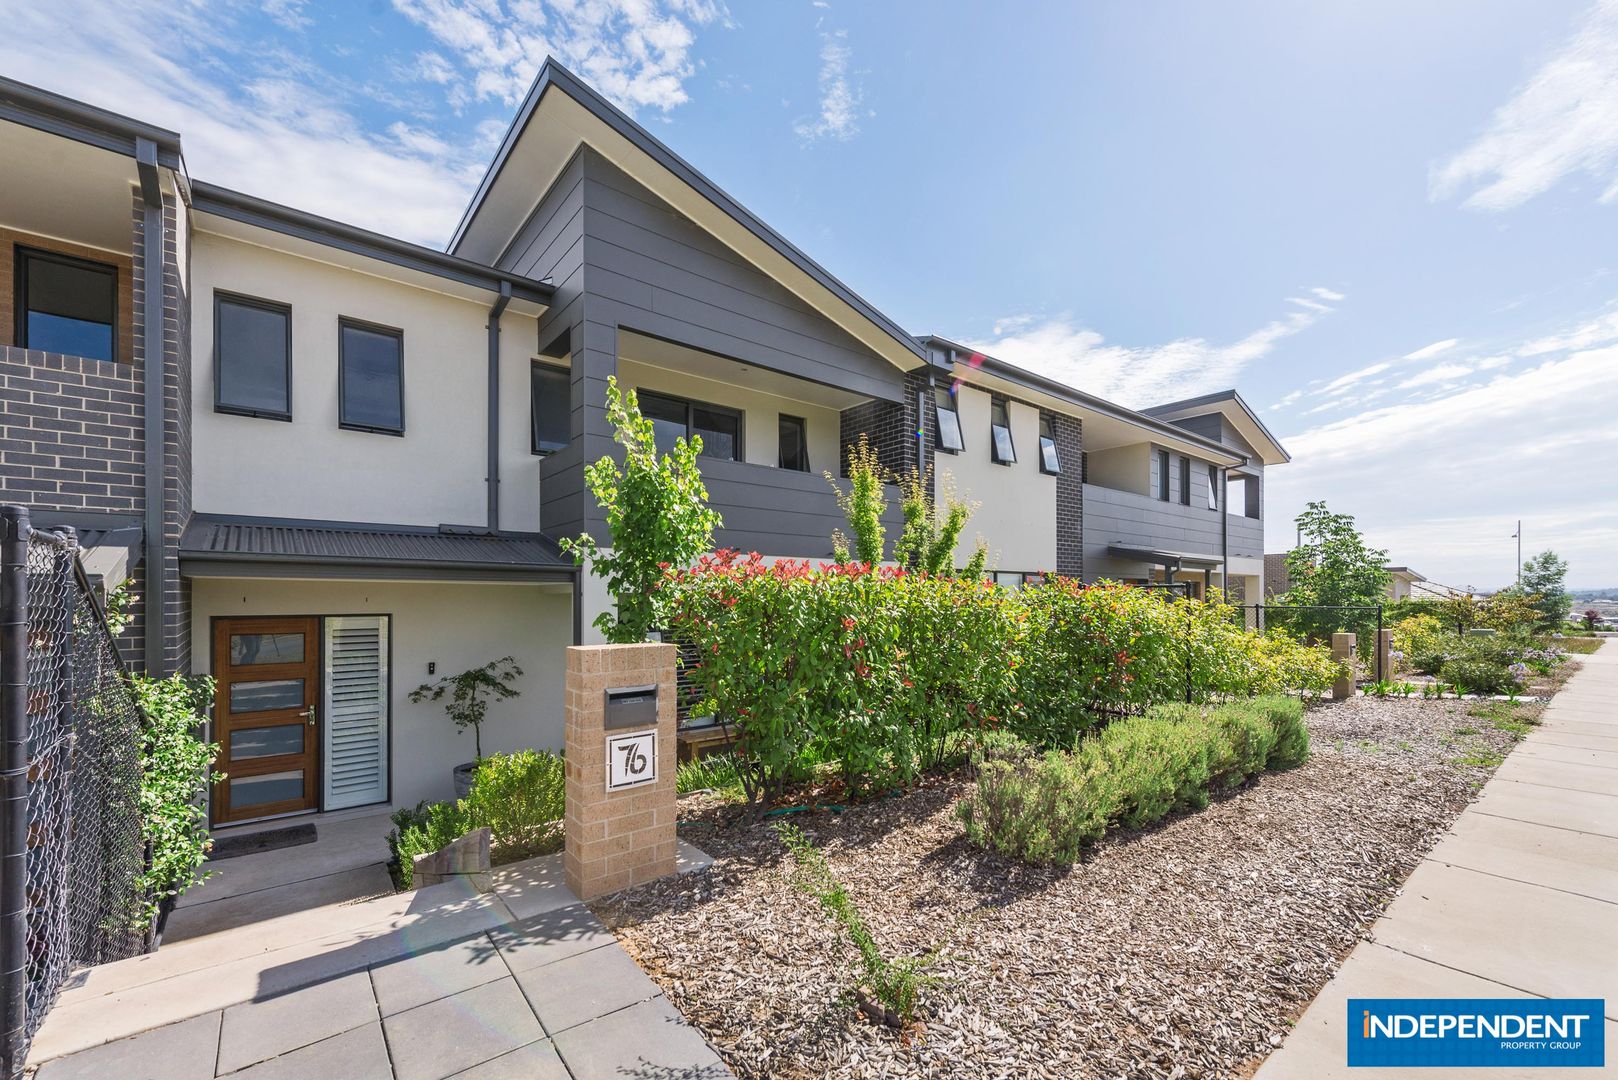 76 Peter Cullen Way, Wright ACT 2611